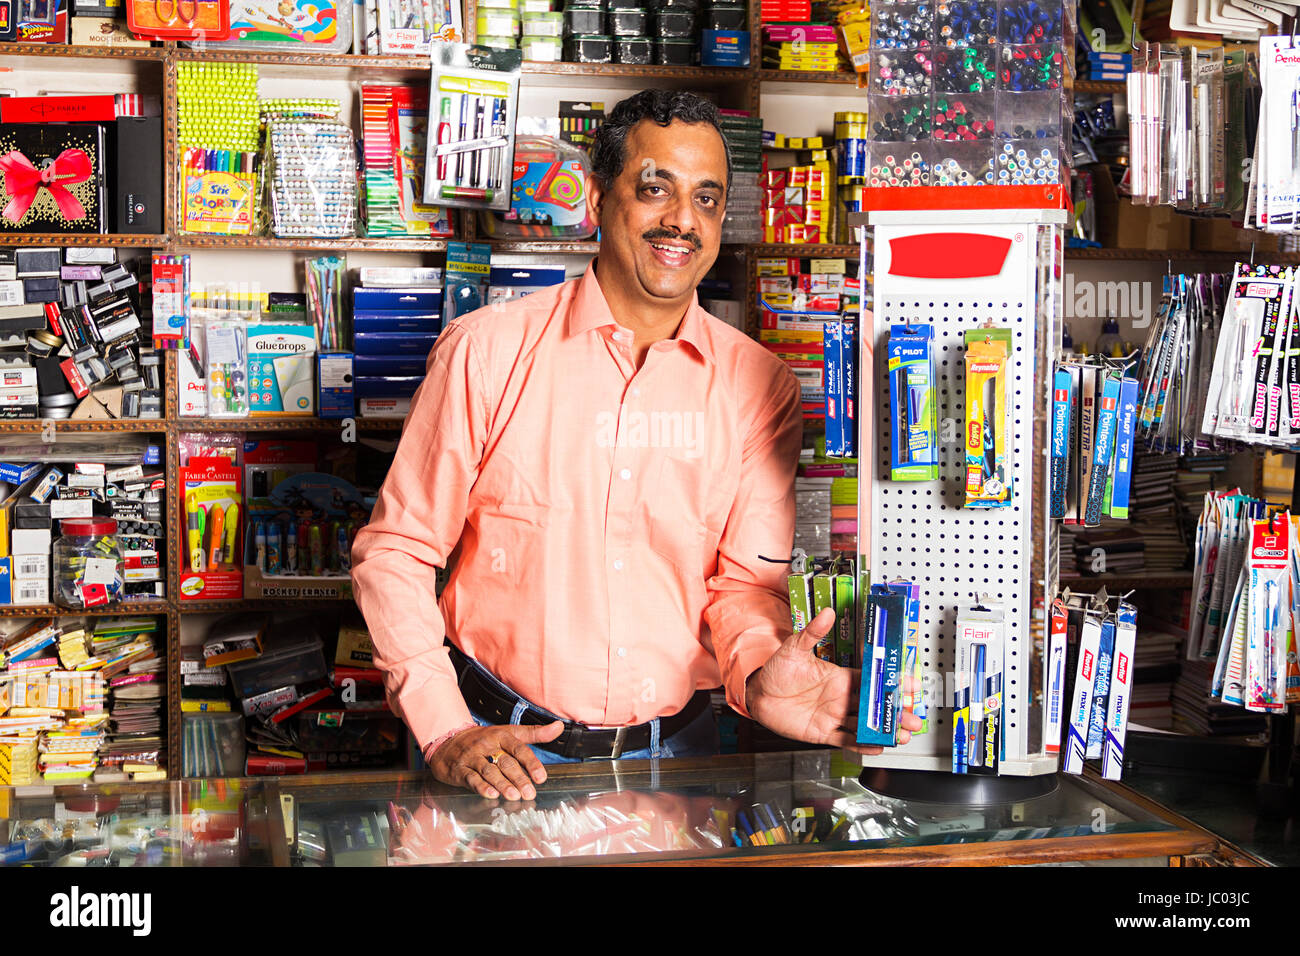 1 Indian Shopkeeper Man Showing Pens In Stationery Shop Stock Photo